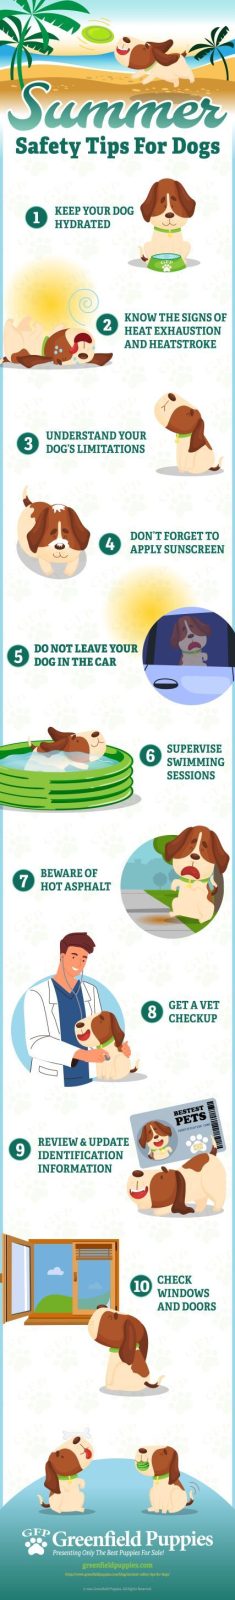 Summer Safety Tips For Dogs - Infographic by Greenfield Puppies